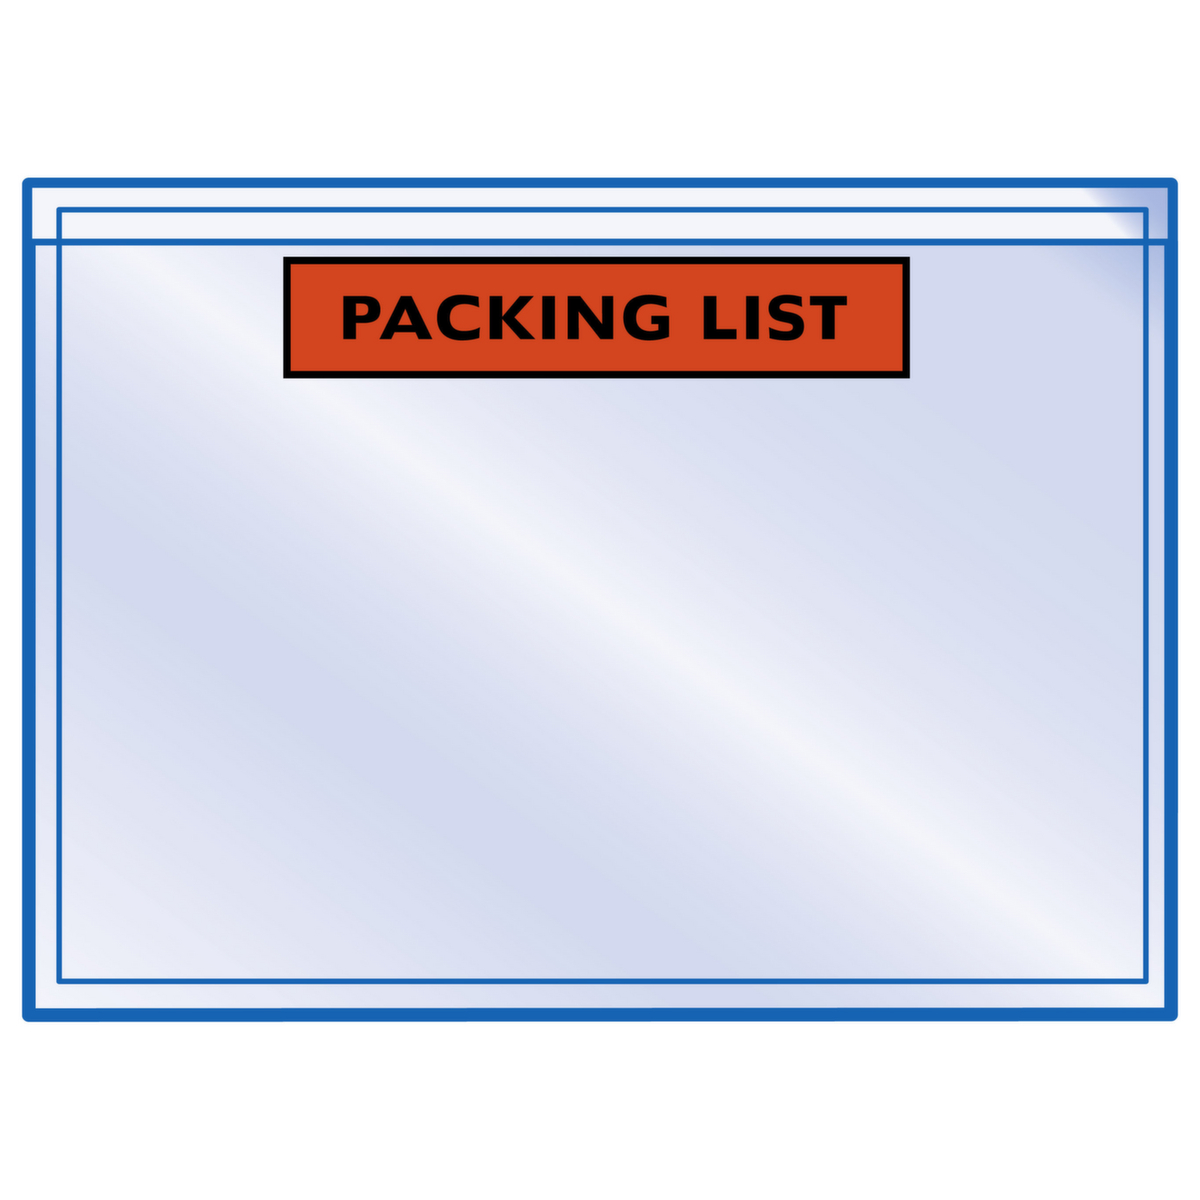 Raja Documenthoes "Packing List", DIN A5  ZOOM